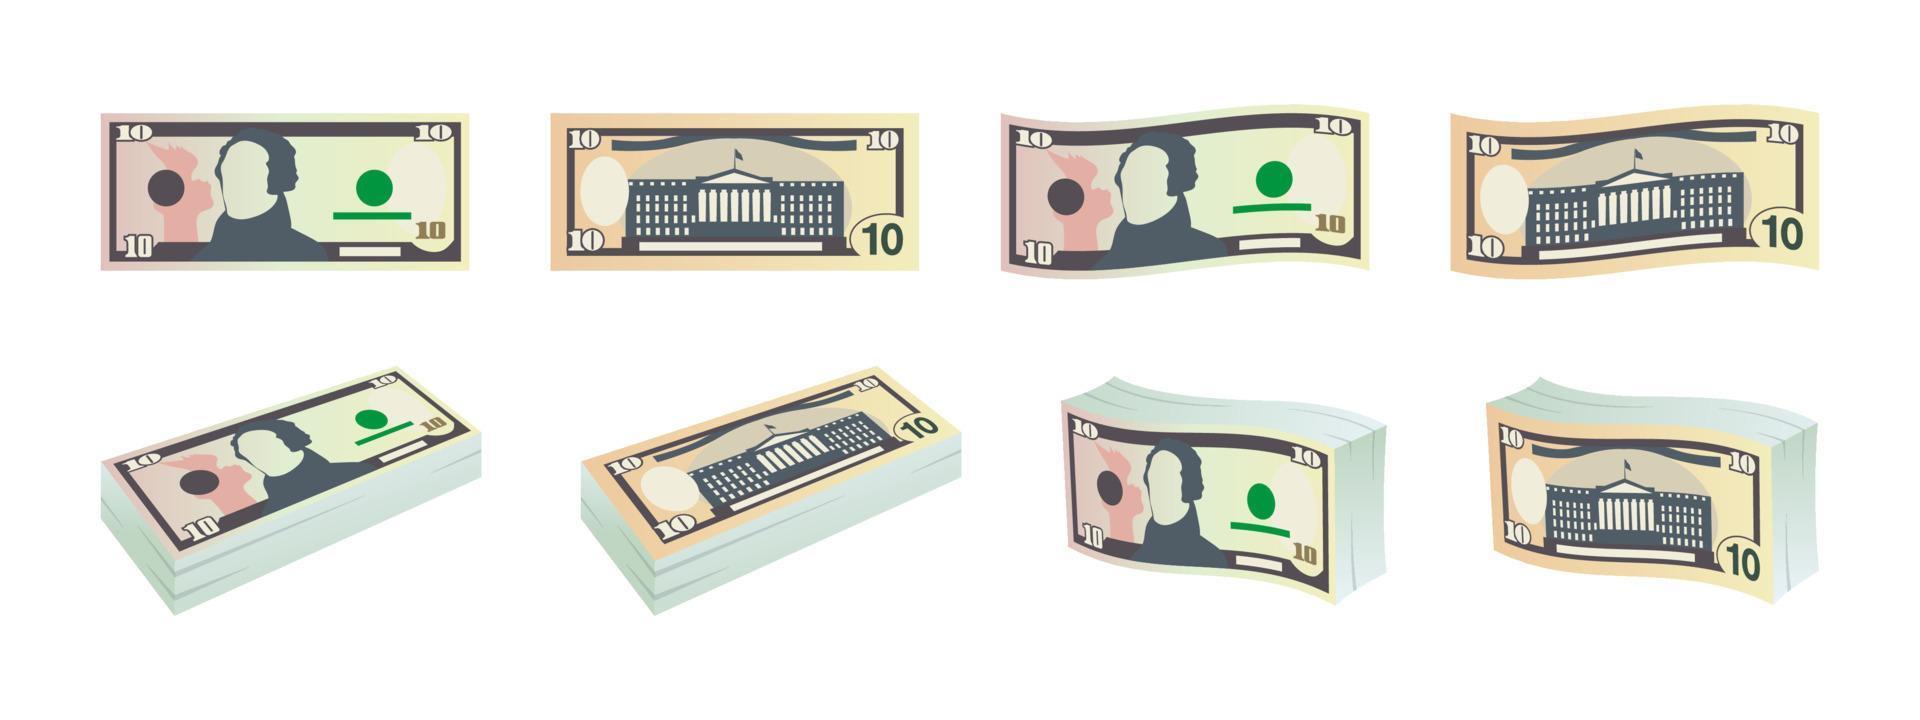 Dollars icons. Ten dollar bills. Dollars banknotes from front and reverse side. Dollar's banknotes set. Vector illustration